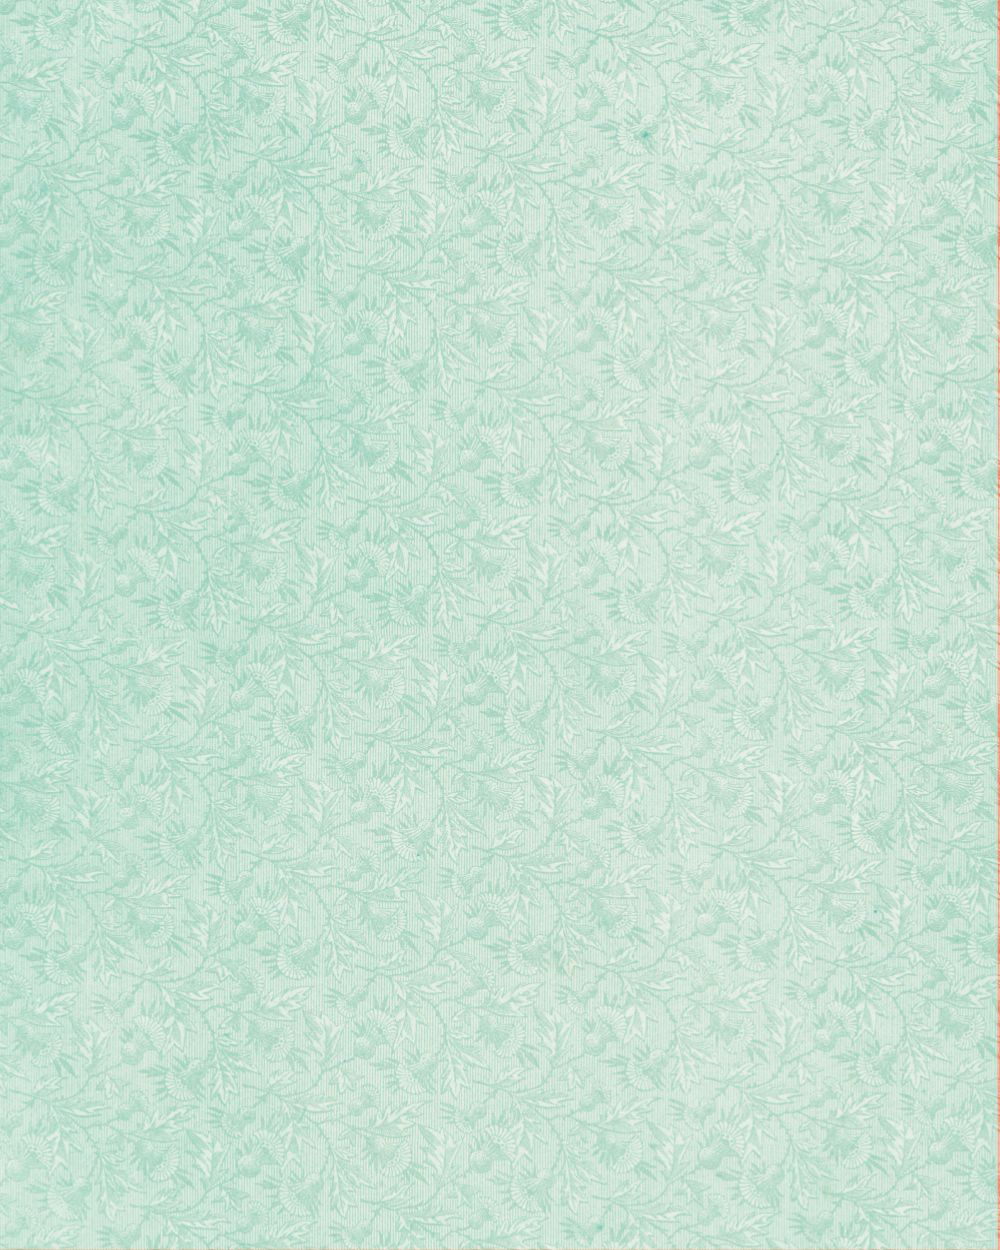 Free Floral Paper Backgrounds | Backgrounds! | Pinterest | Paper - Free Printable Card Stock Paper